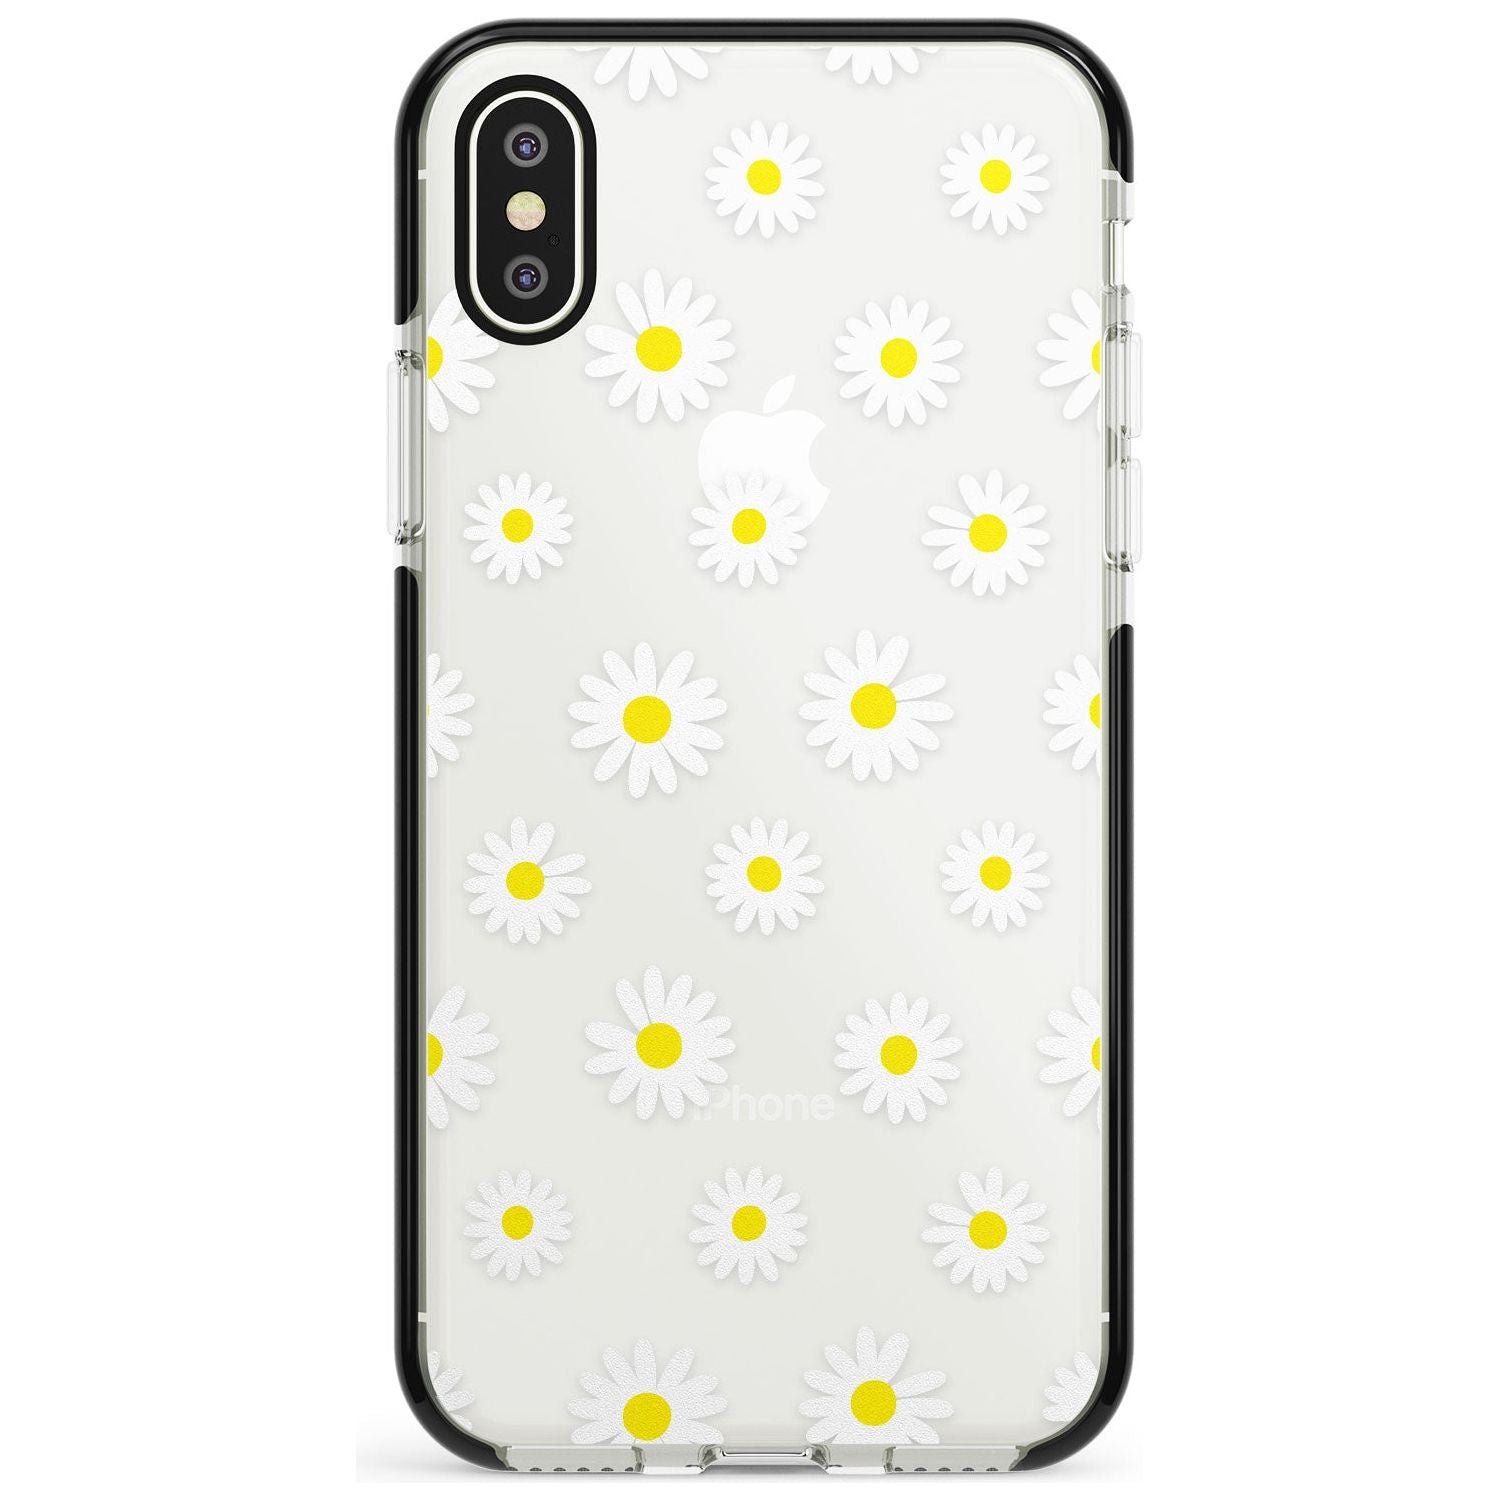 White Daisy Pattern (Clear) Black Impact Phone Case for iPhone X XS Max XR